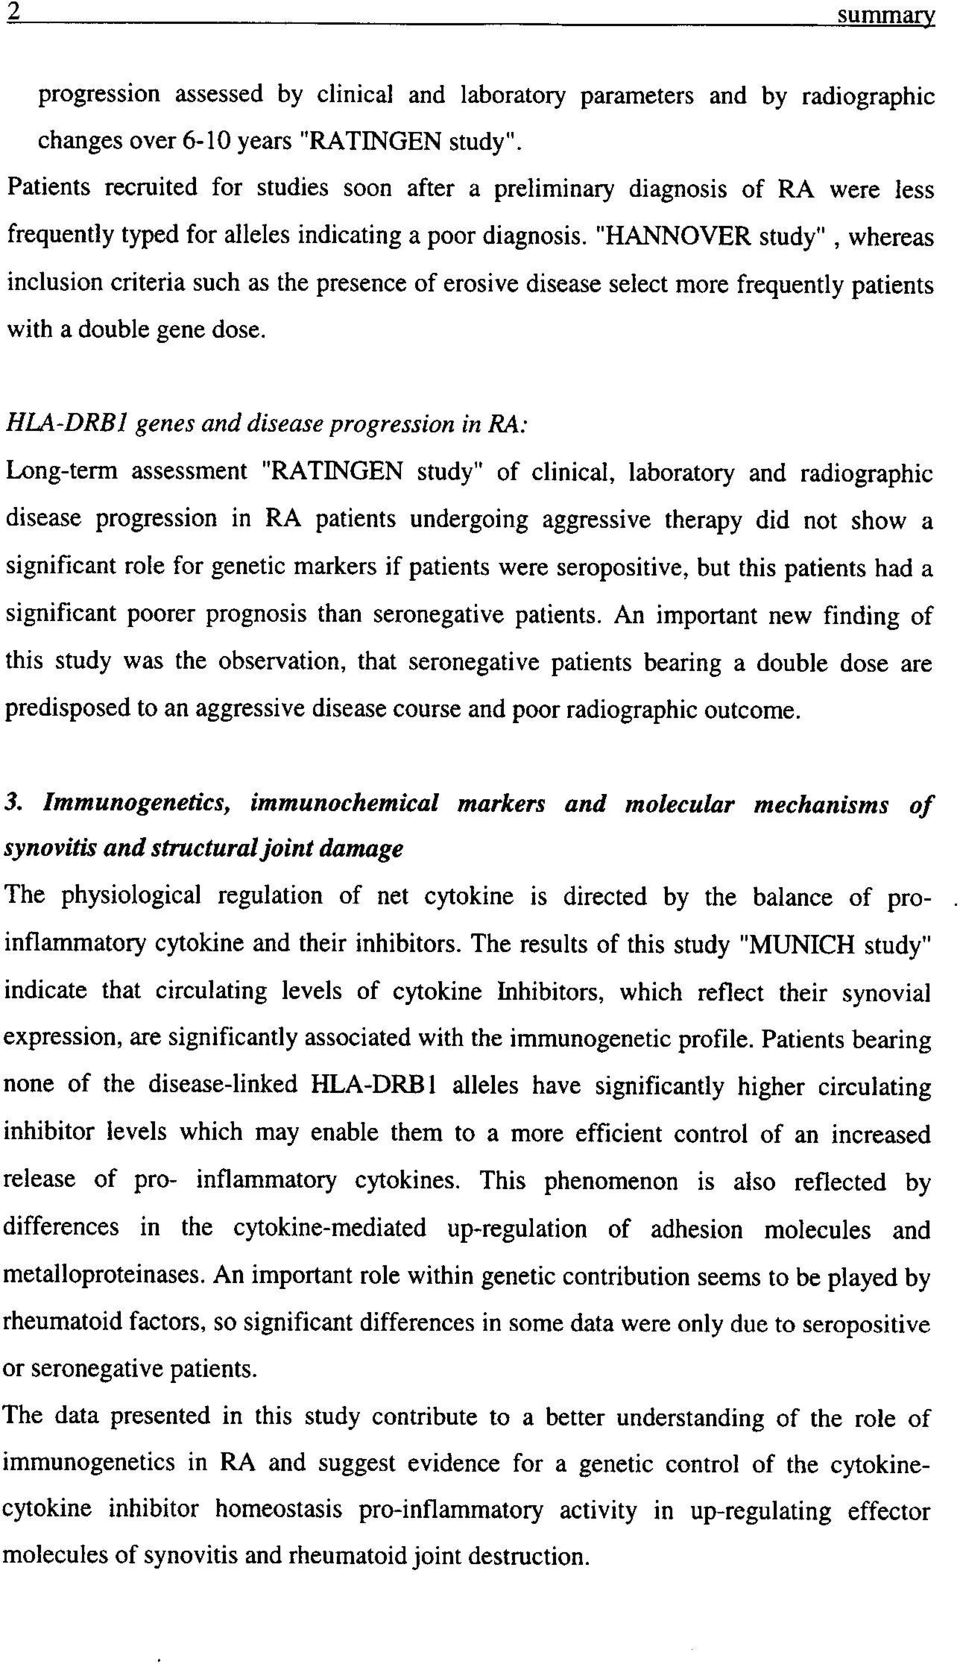 double gene dose HLA-DRBl genes and disease progression in RA Long-term assessment "RATINGEN study" of clinical, laboratory and radiographic disease progression in RA patients undergoing aggressive